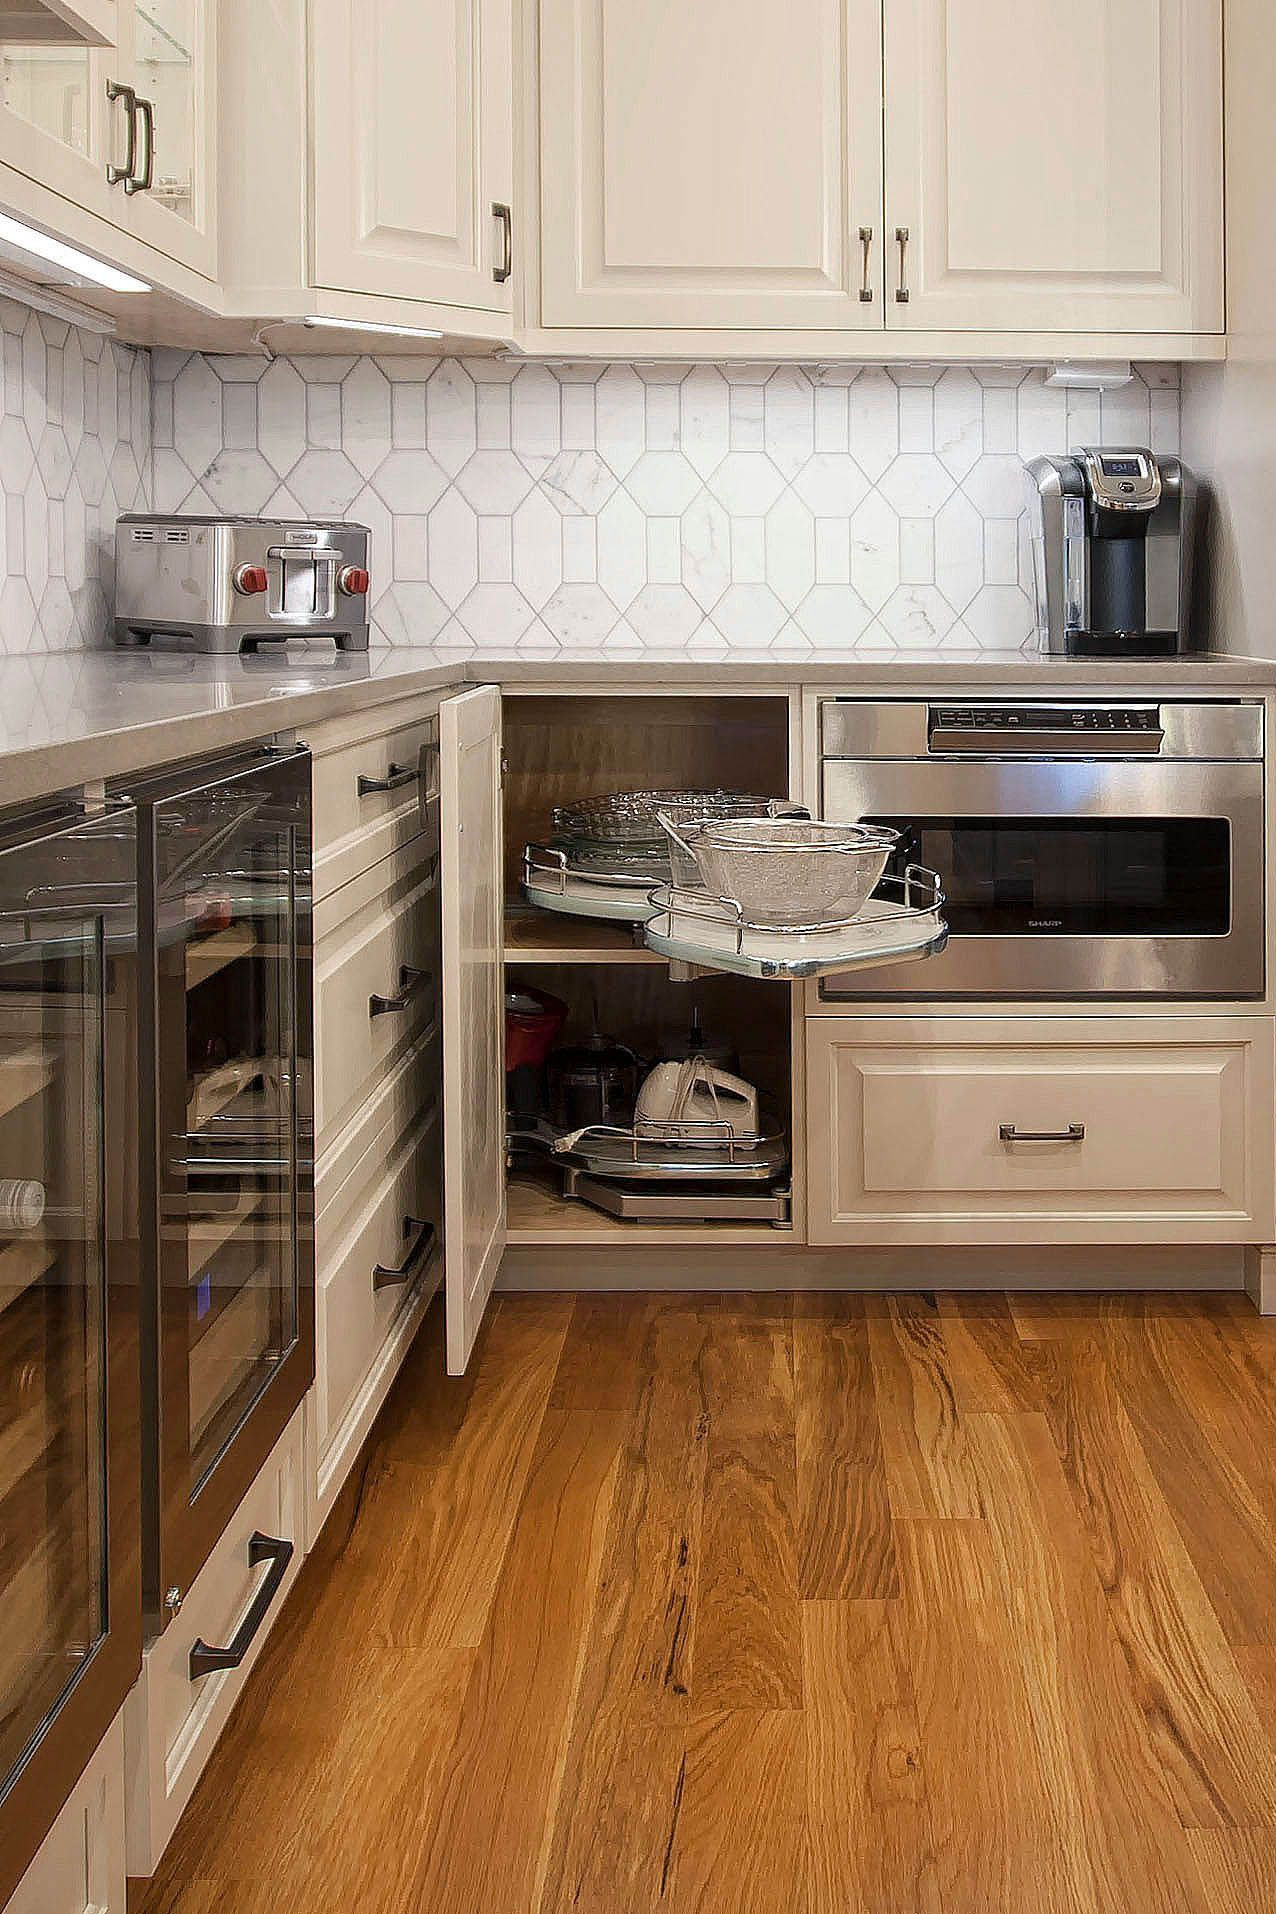 Extra Storage Cabinet For Kitchen
 Browse by Room